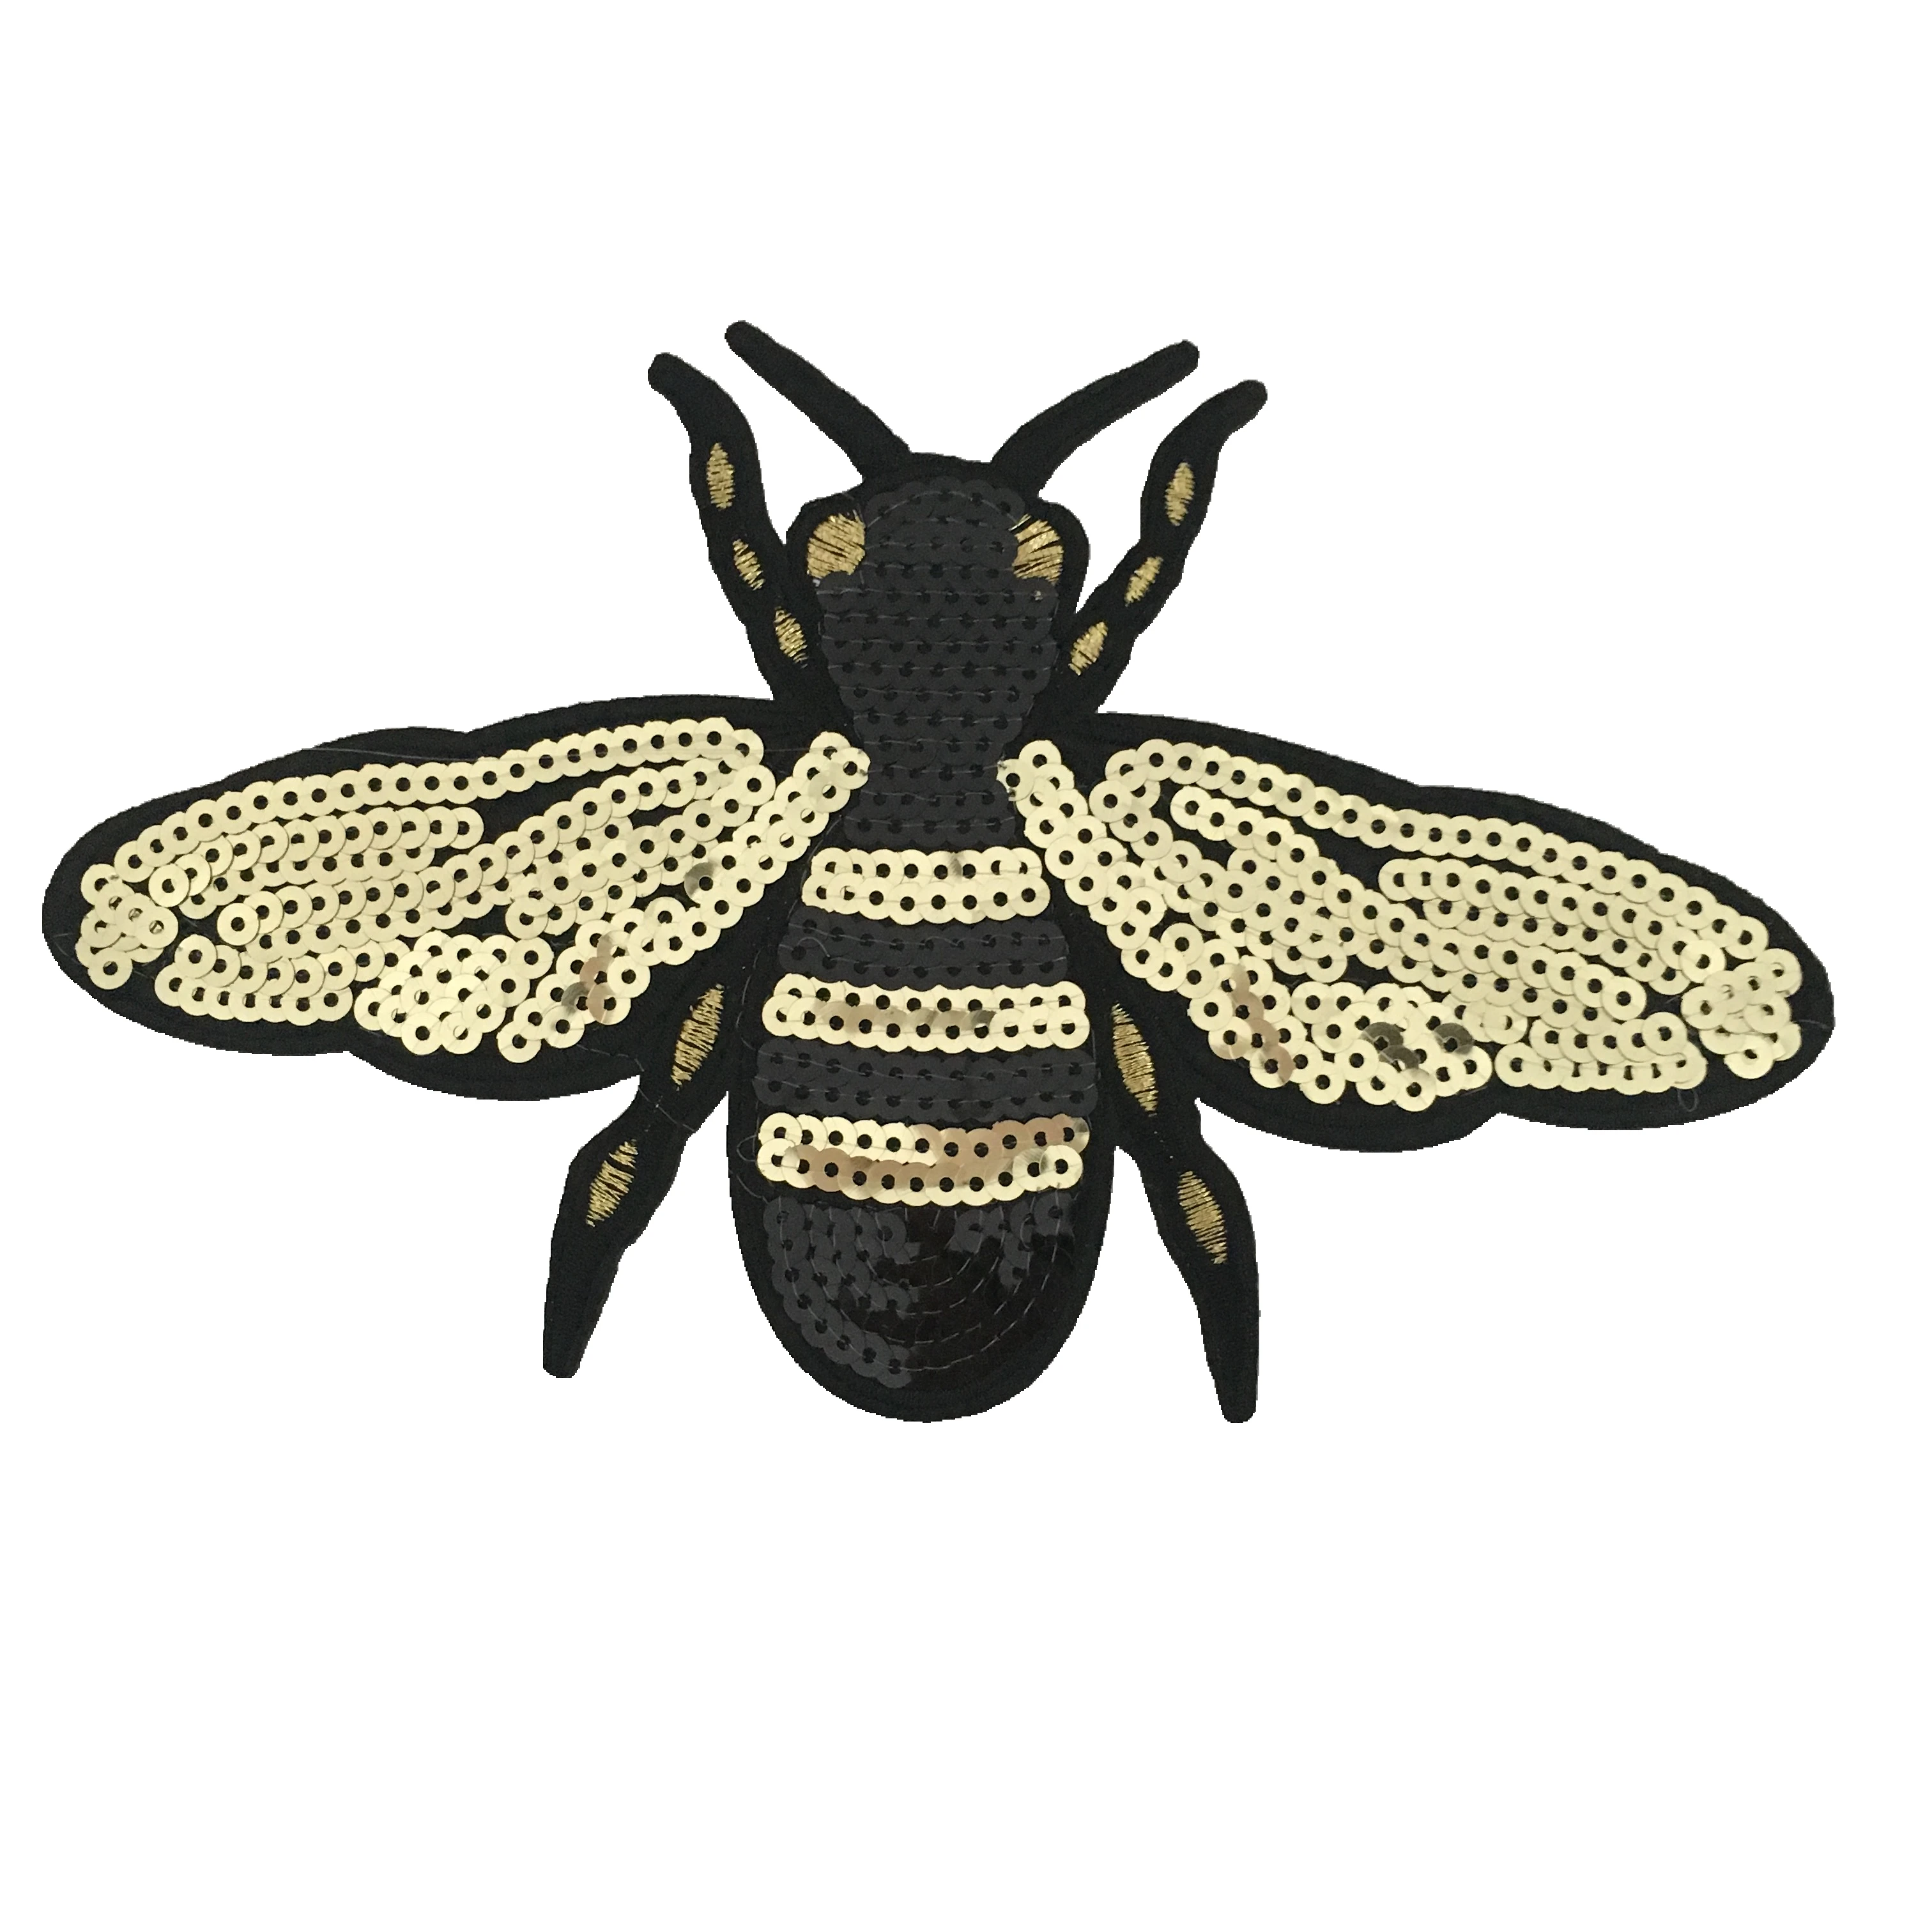 

3PCS/SET Gold Bee Patches Iron on Patches for Clothes Jacket DIY Accessory Decorative Applique Insect Honeybee Sequined Patches